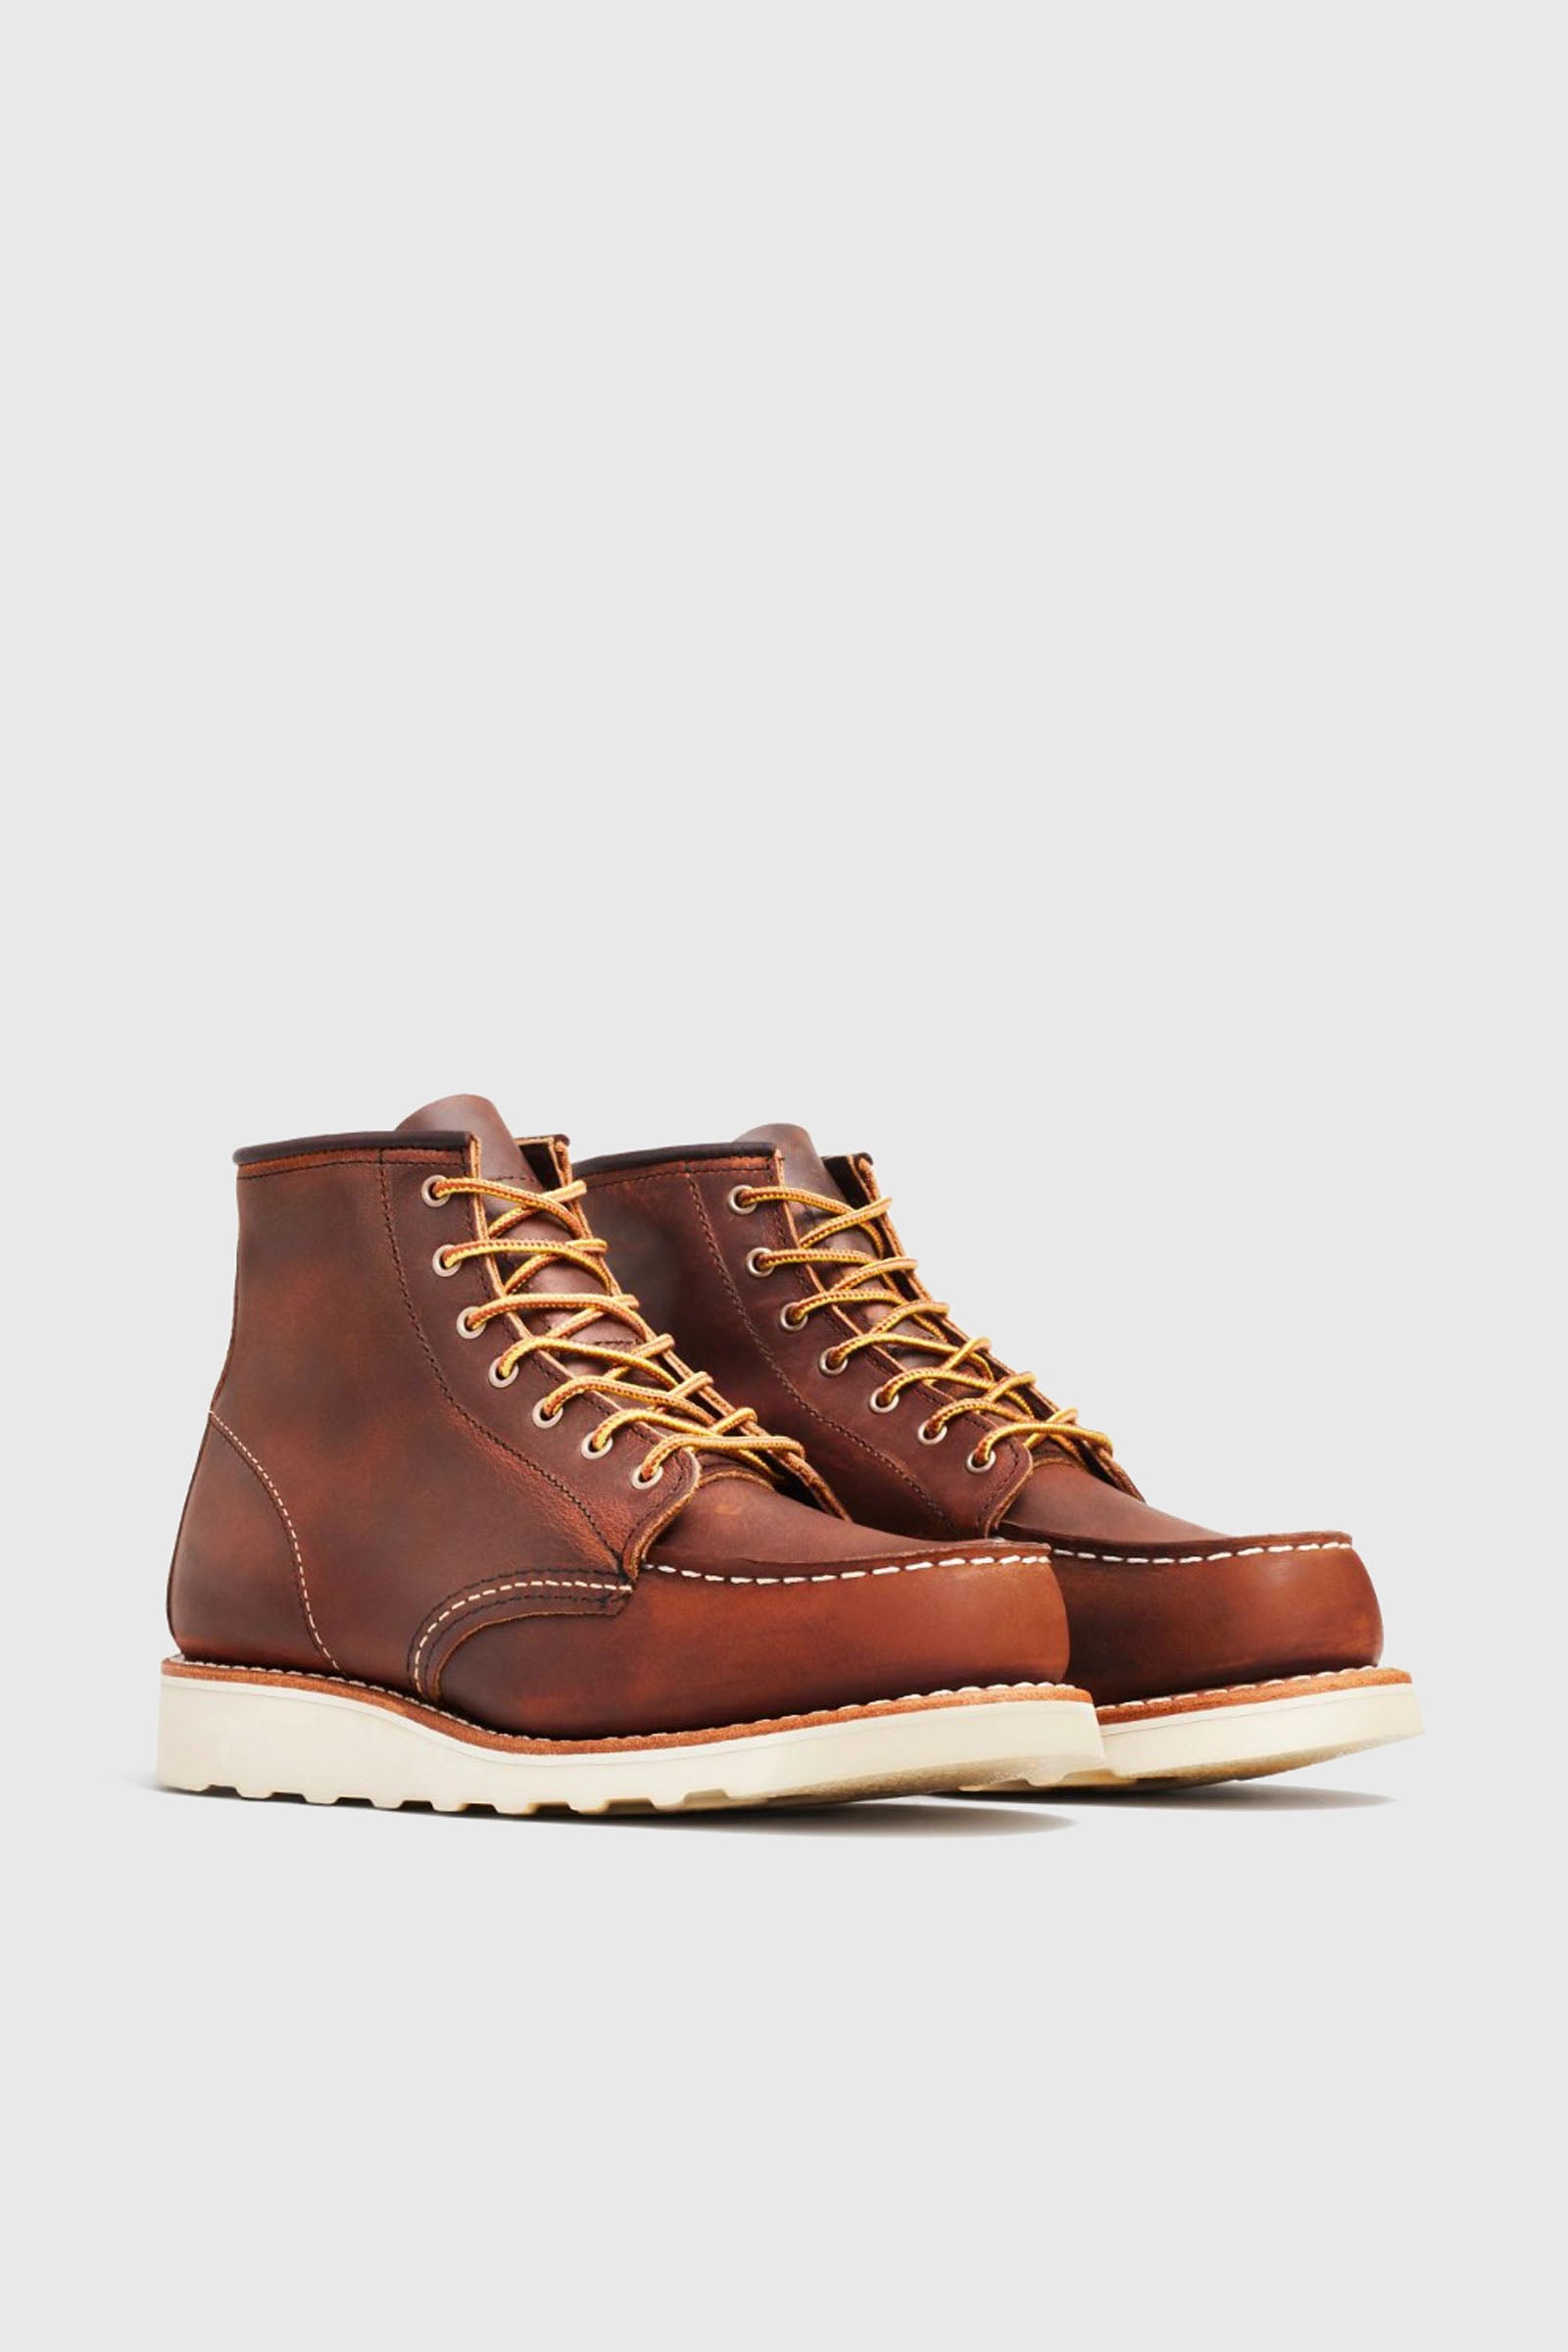 Red Wing Shoes 6-Inch Classic Moc Brown Leather - 2